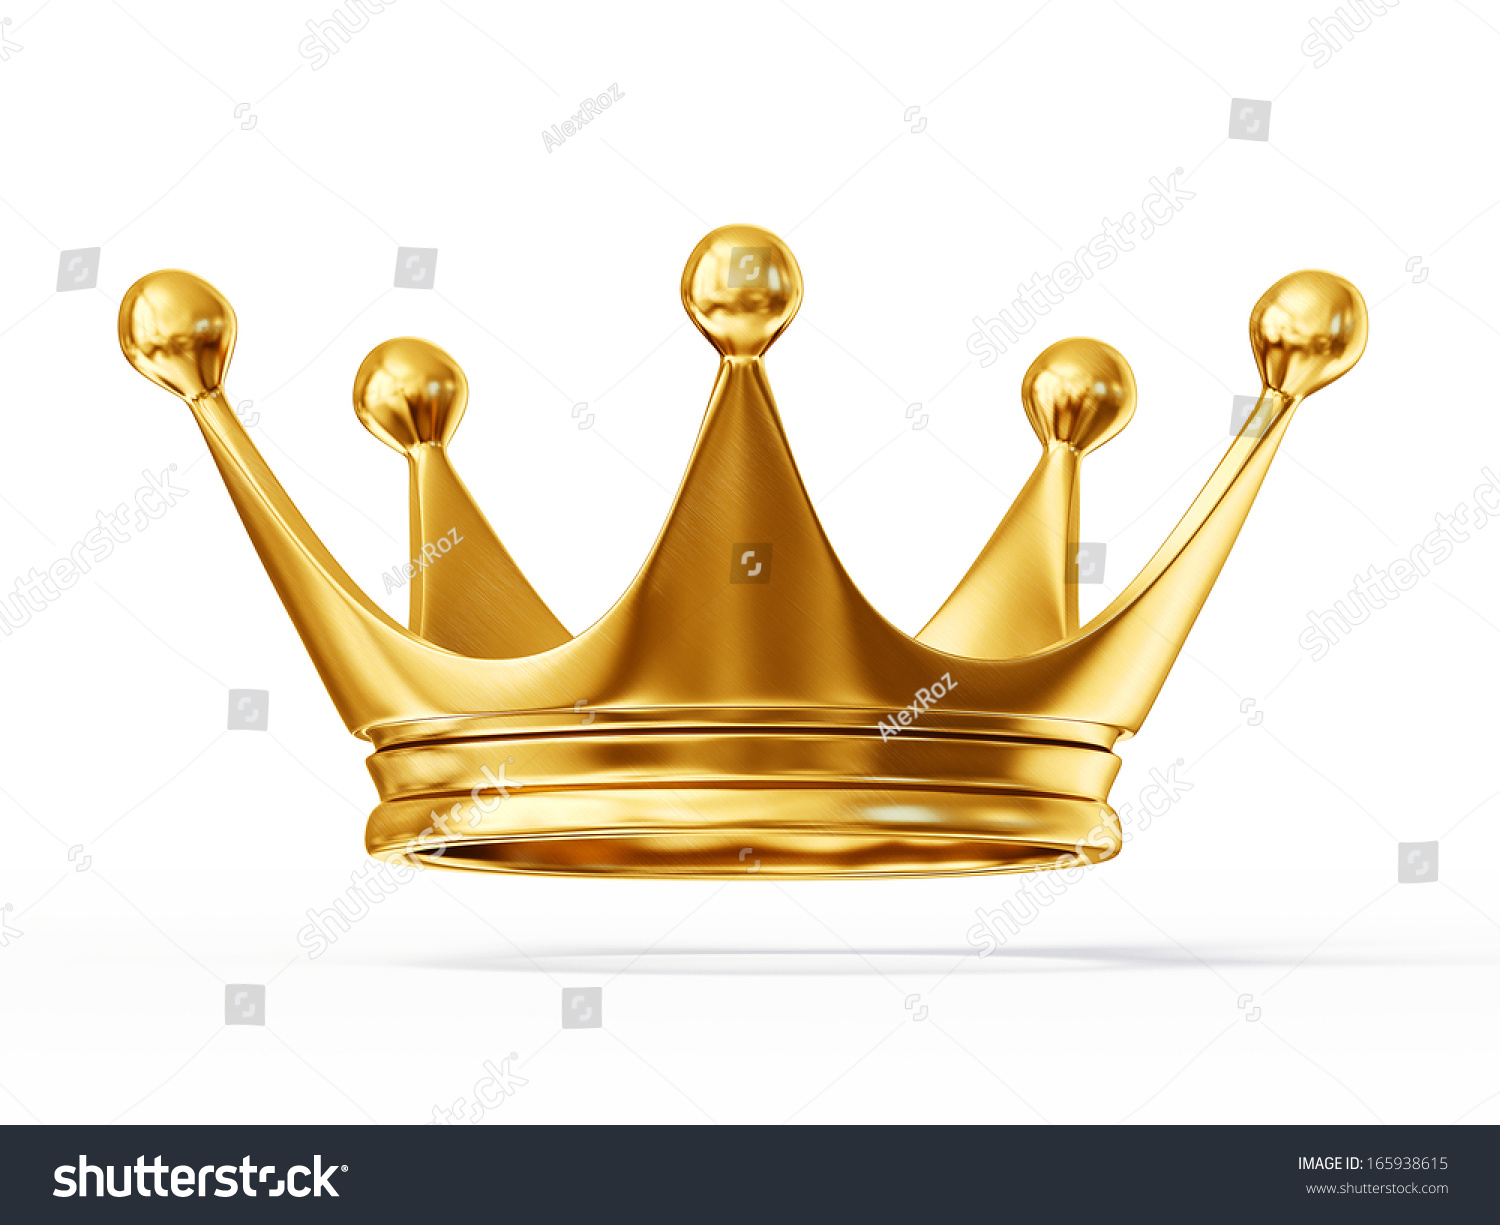 Golden Crown Isolated On A White Background Stock Photo 165938615 ...